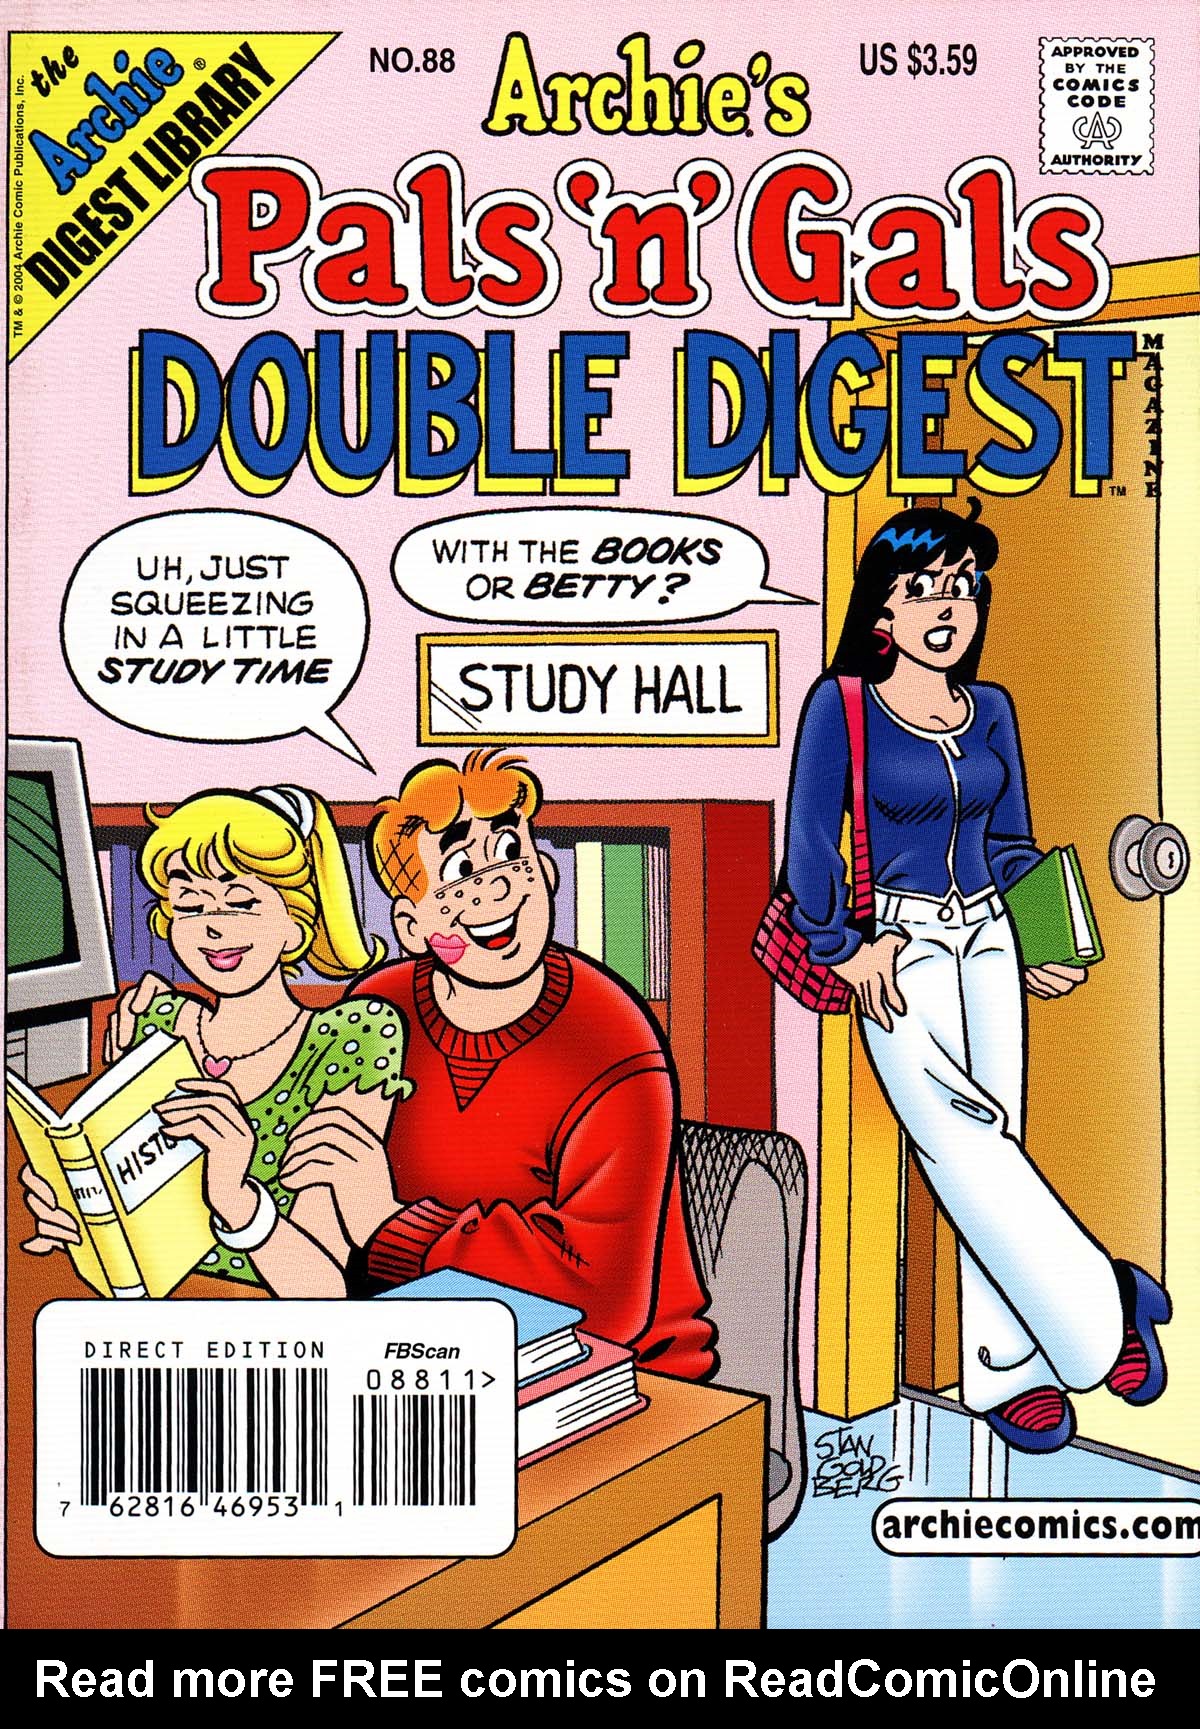 Archie's Pals 'n' Gals Double Digest Magazine issue 88 - Page 1